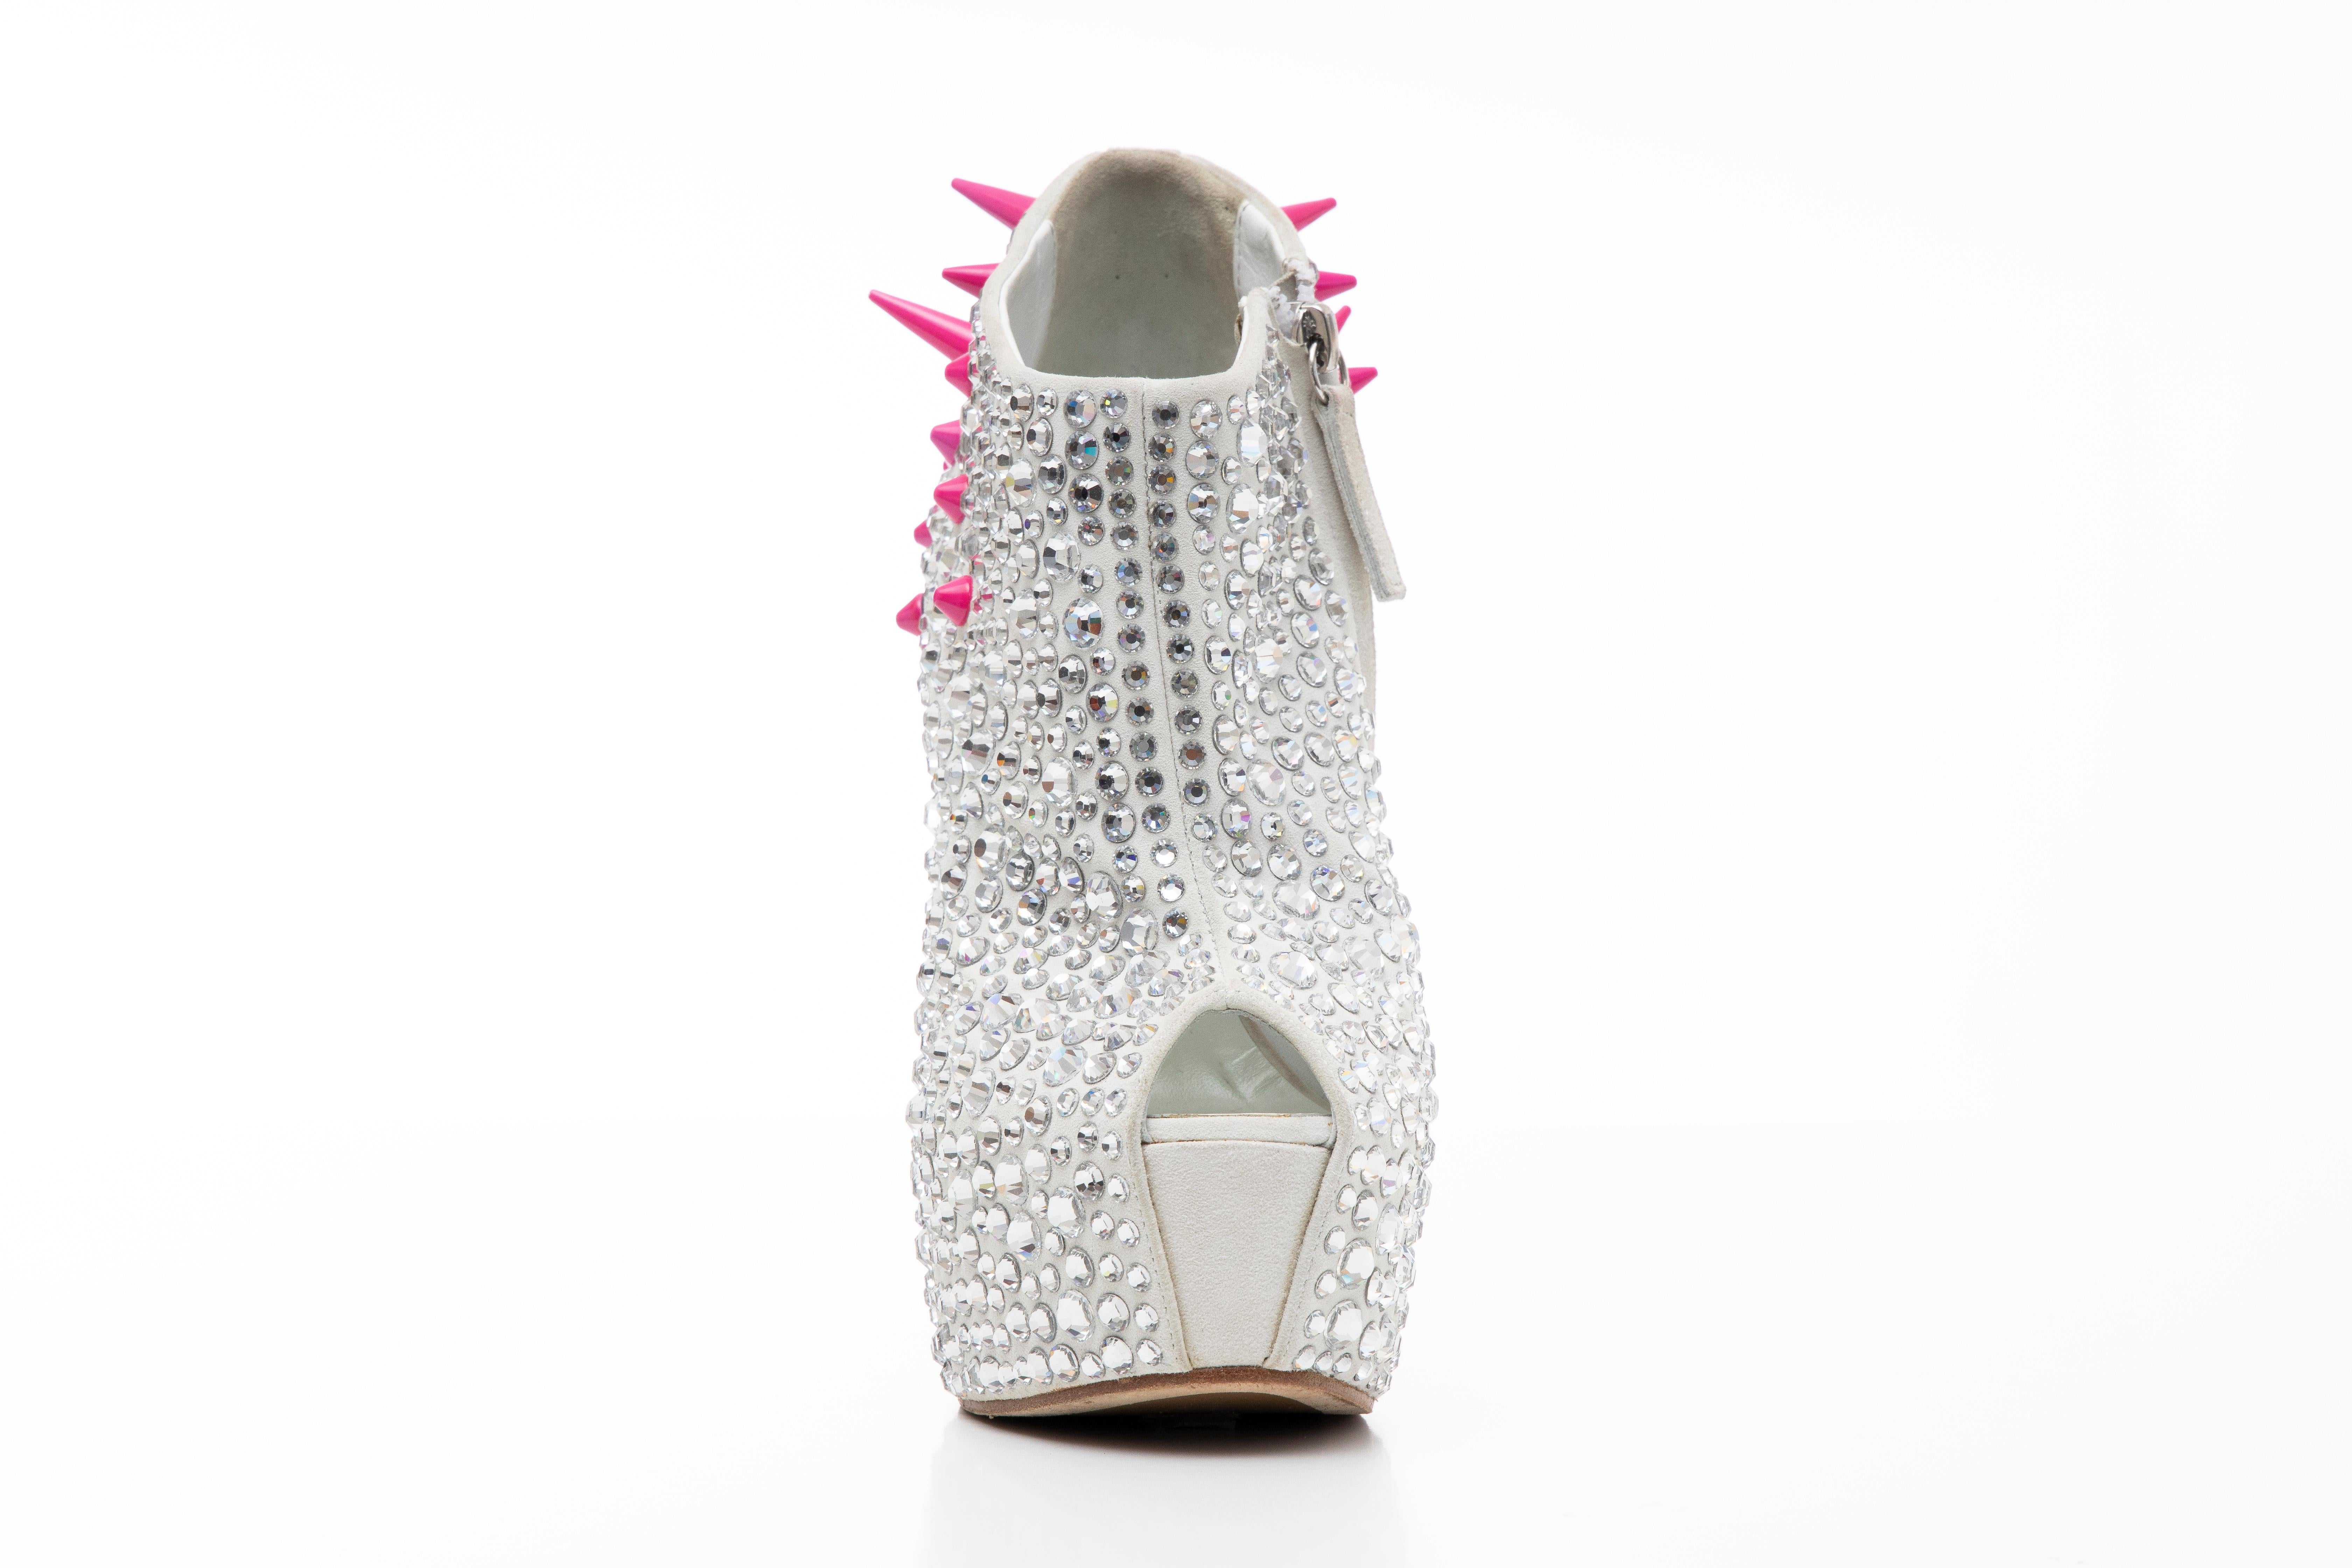 Guiseppe Zanotti Swarovski Crystal & Pink Spiked-Embellished Wedges Fall 2012 In Good Condition For Sale In Cincinnati, OH